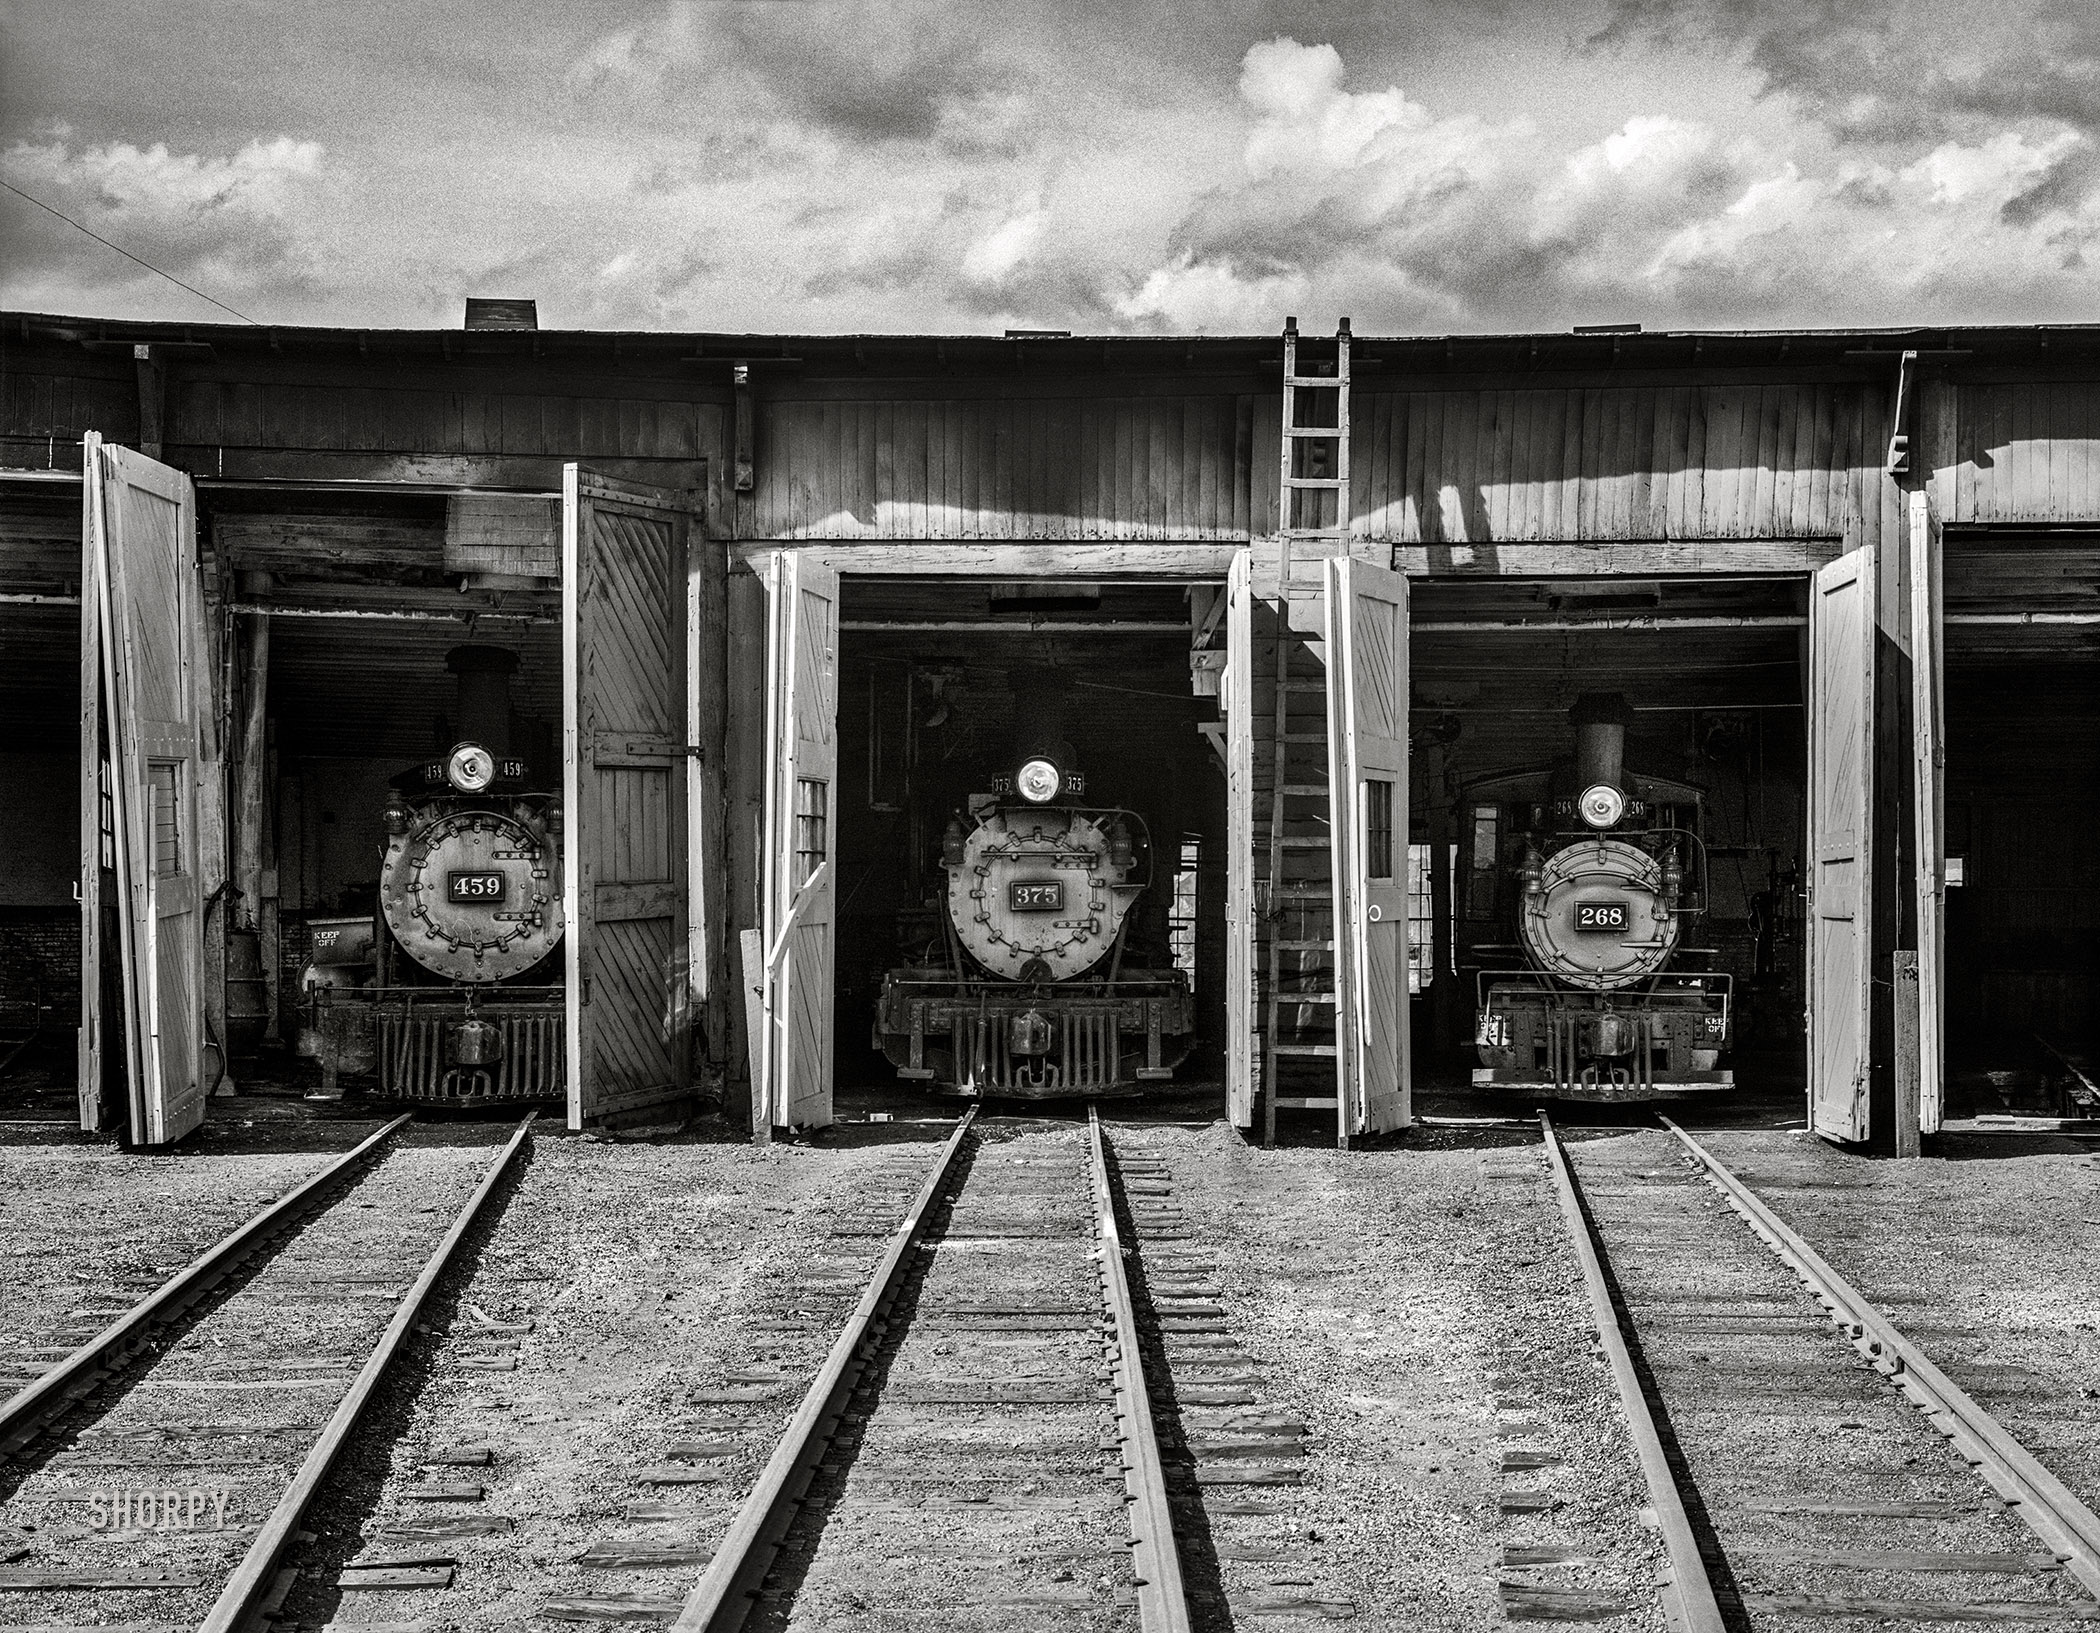 September 1940. "Locomotives in roundhouse. Durango, Colorado." Medium format acetate negative by Russell Lee for the Farm Security Administration. View full size.